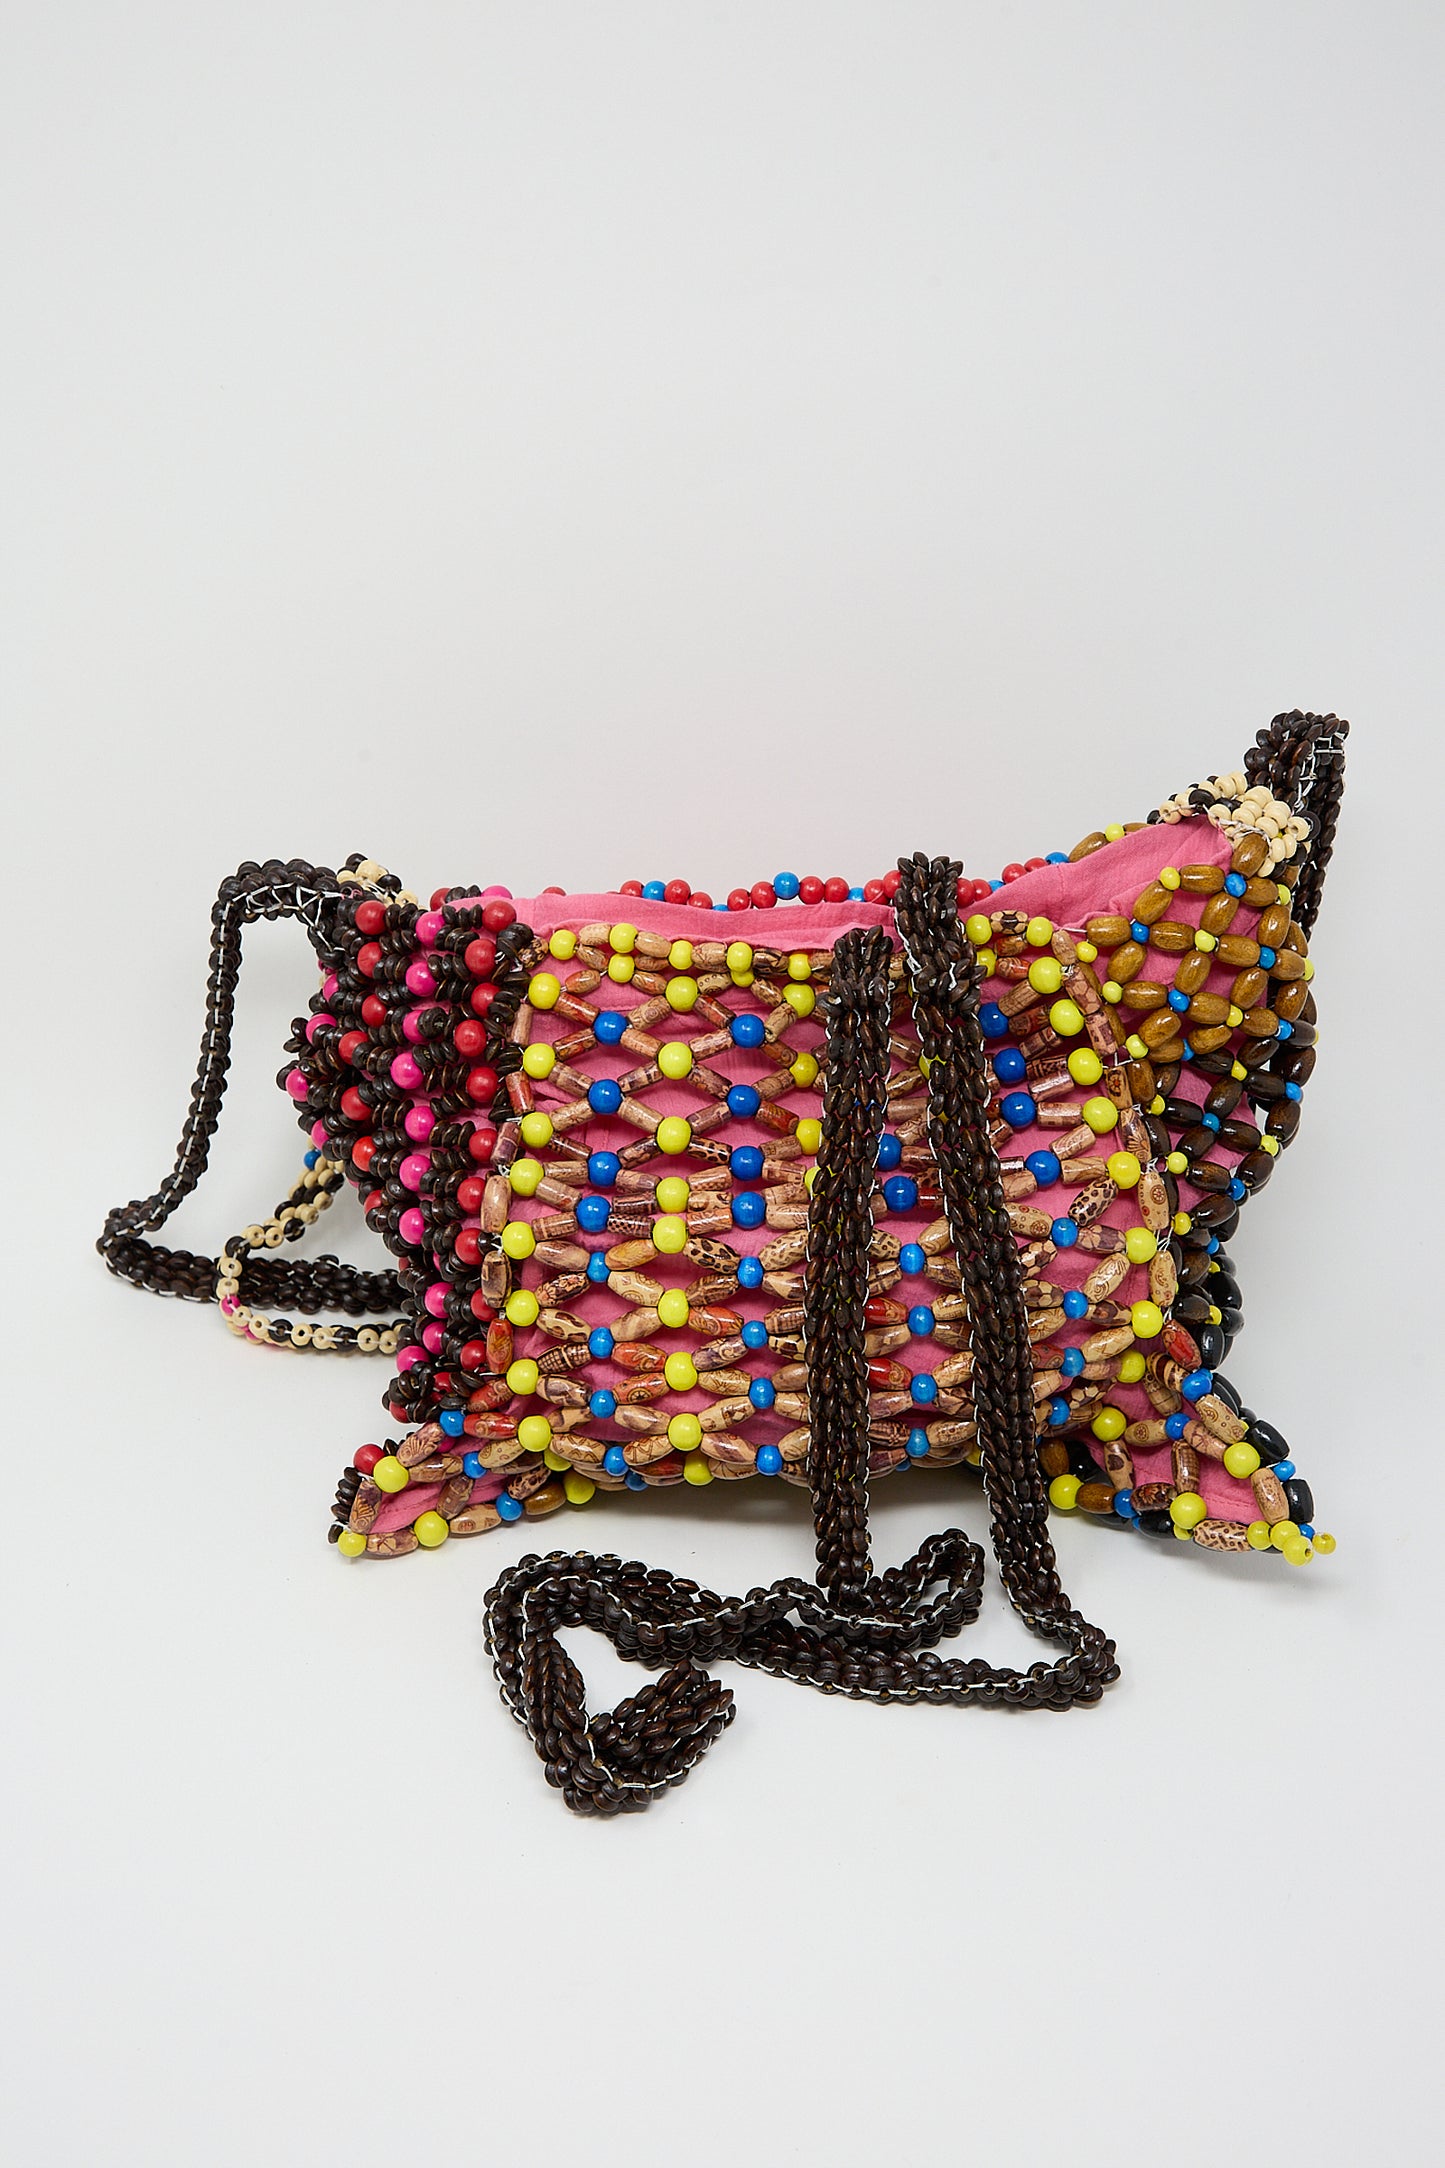 Colorful Assorted Beads Hectic Long Strap Bag in Multi Noise displayed against a white background.